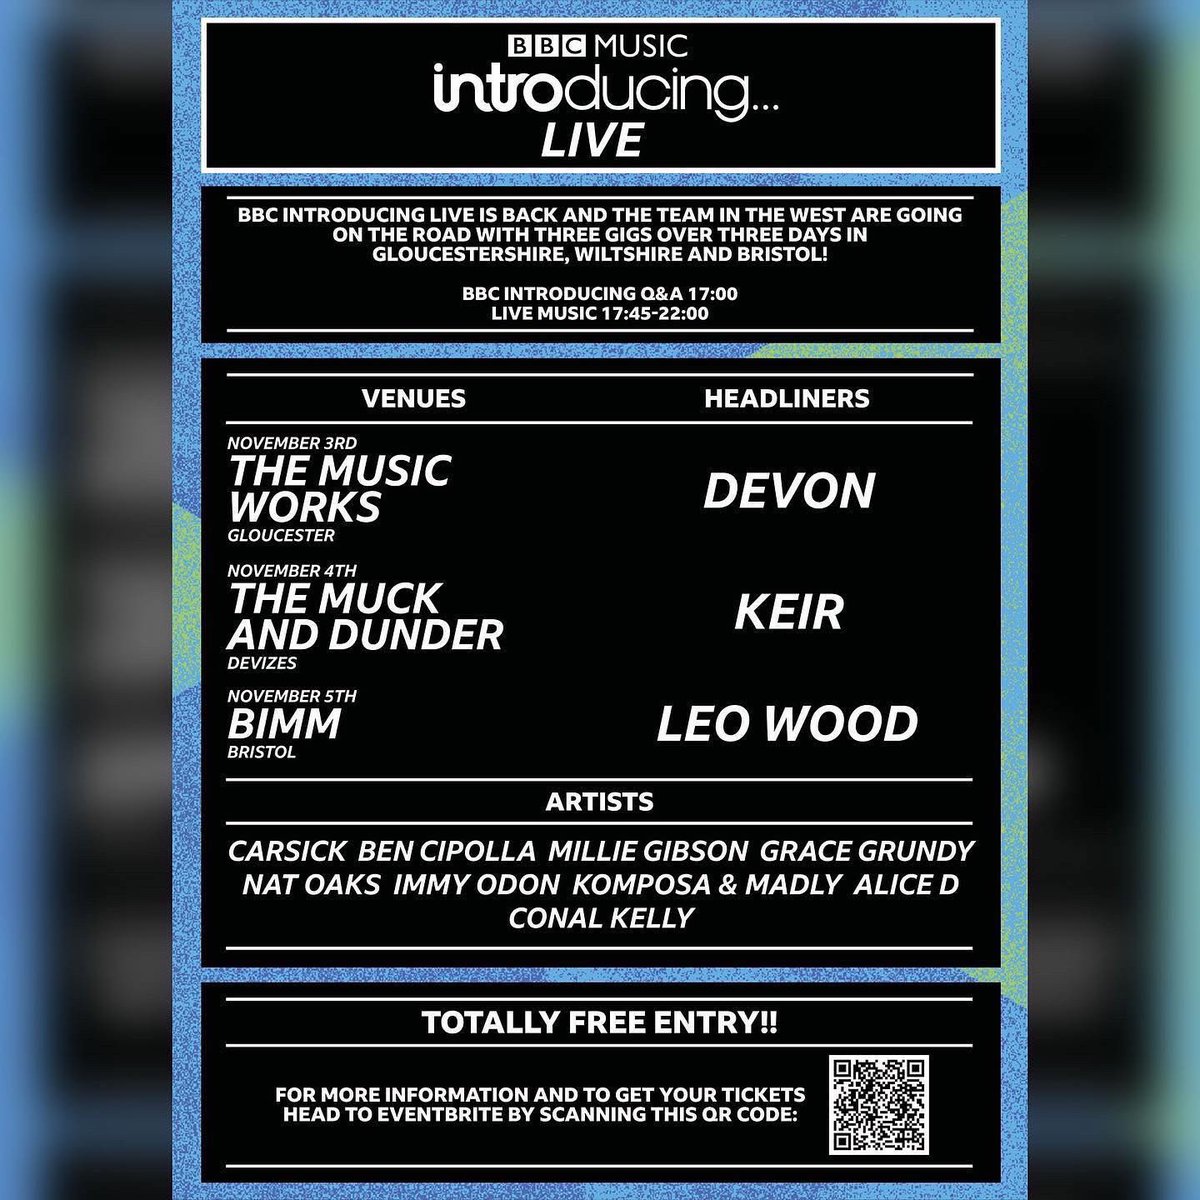 SO excited to announce I’m hitting the road with @bbcintroducing @BBCIntroSW LIVE event across 3 dates ~ Nov 3rd, 4th & 5th🎉 Representing Bristol, my second home! 🎹🥁 Tickets here: eventbrite.com/cc/bbc-introdu…